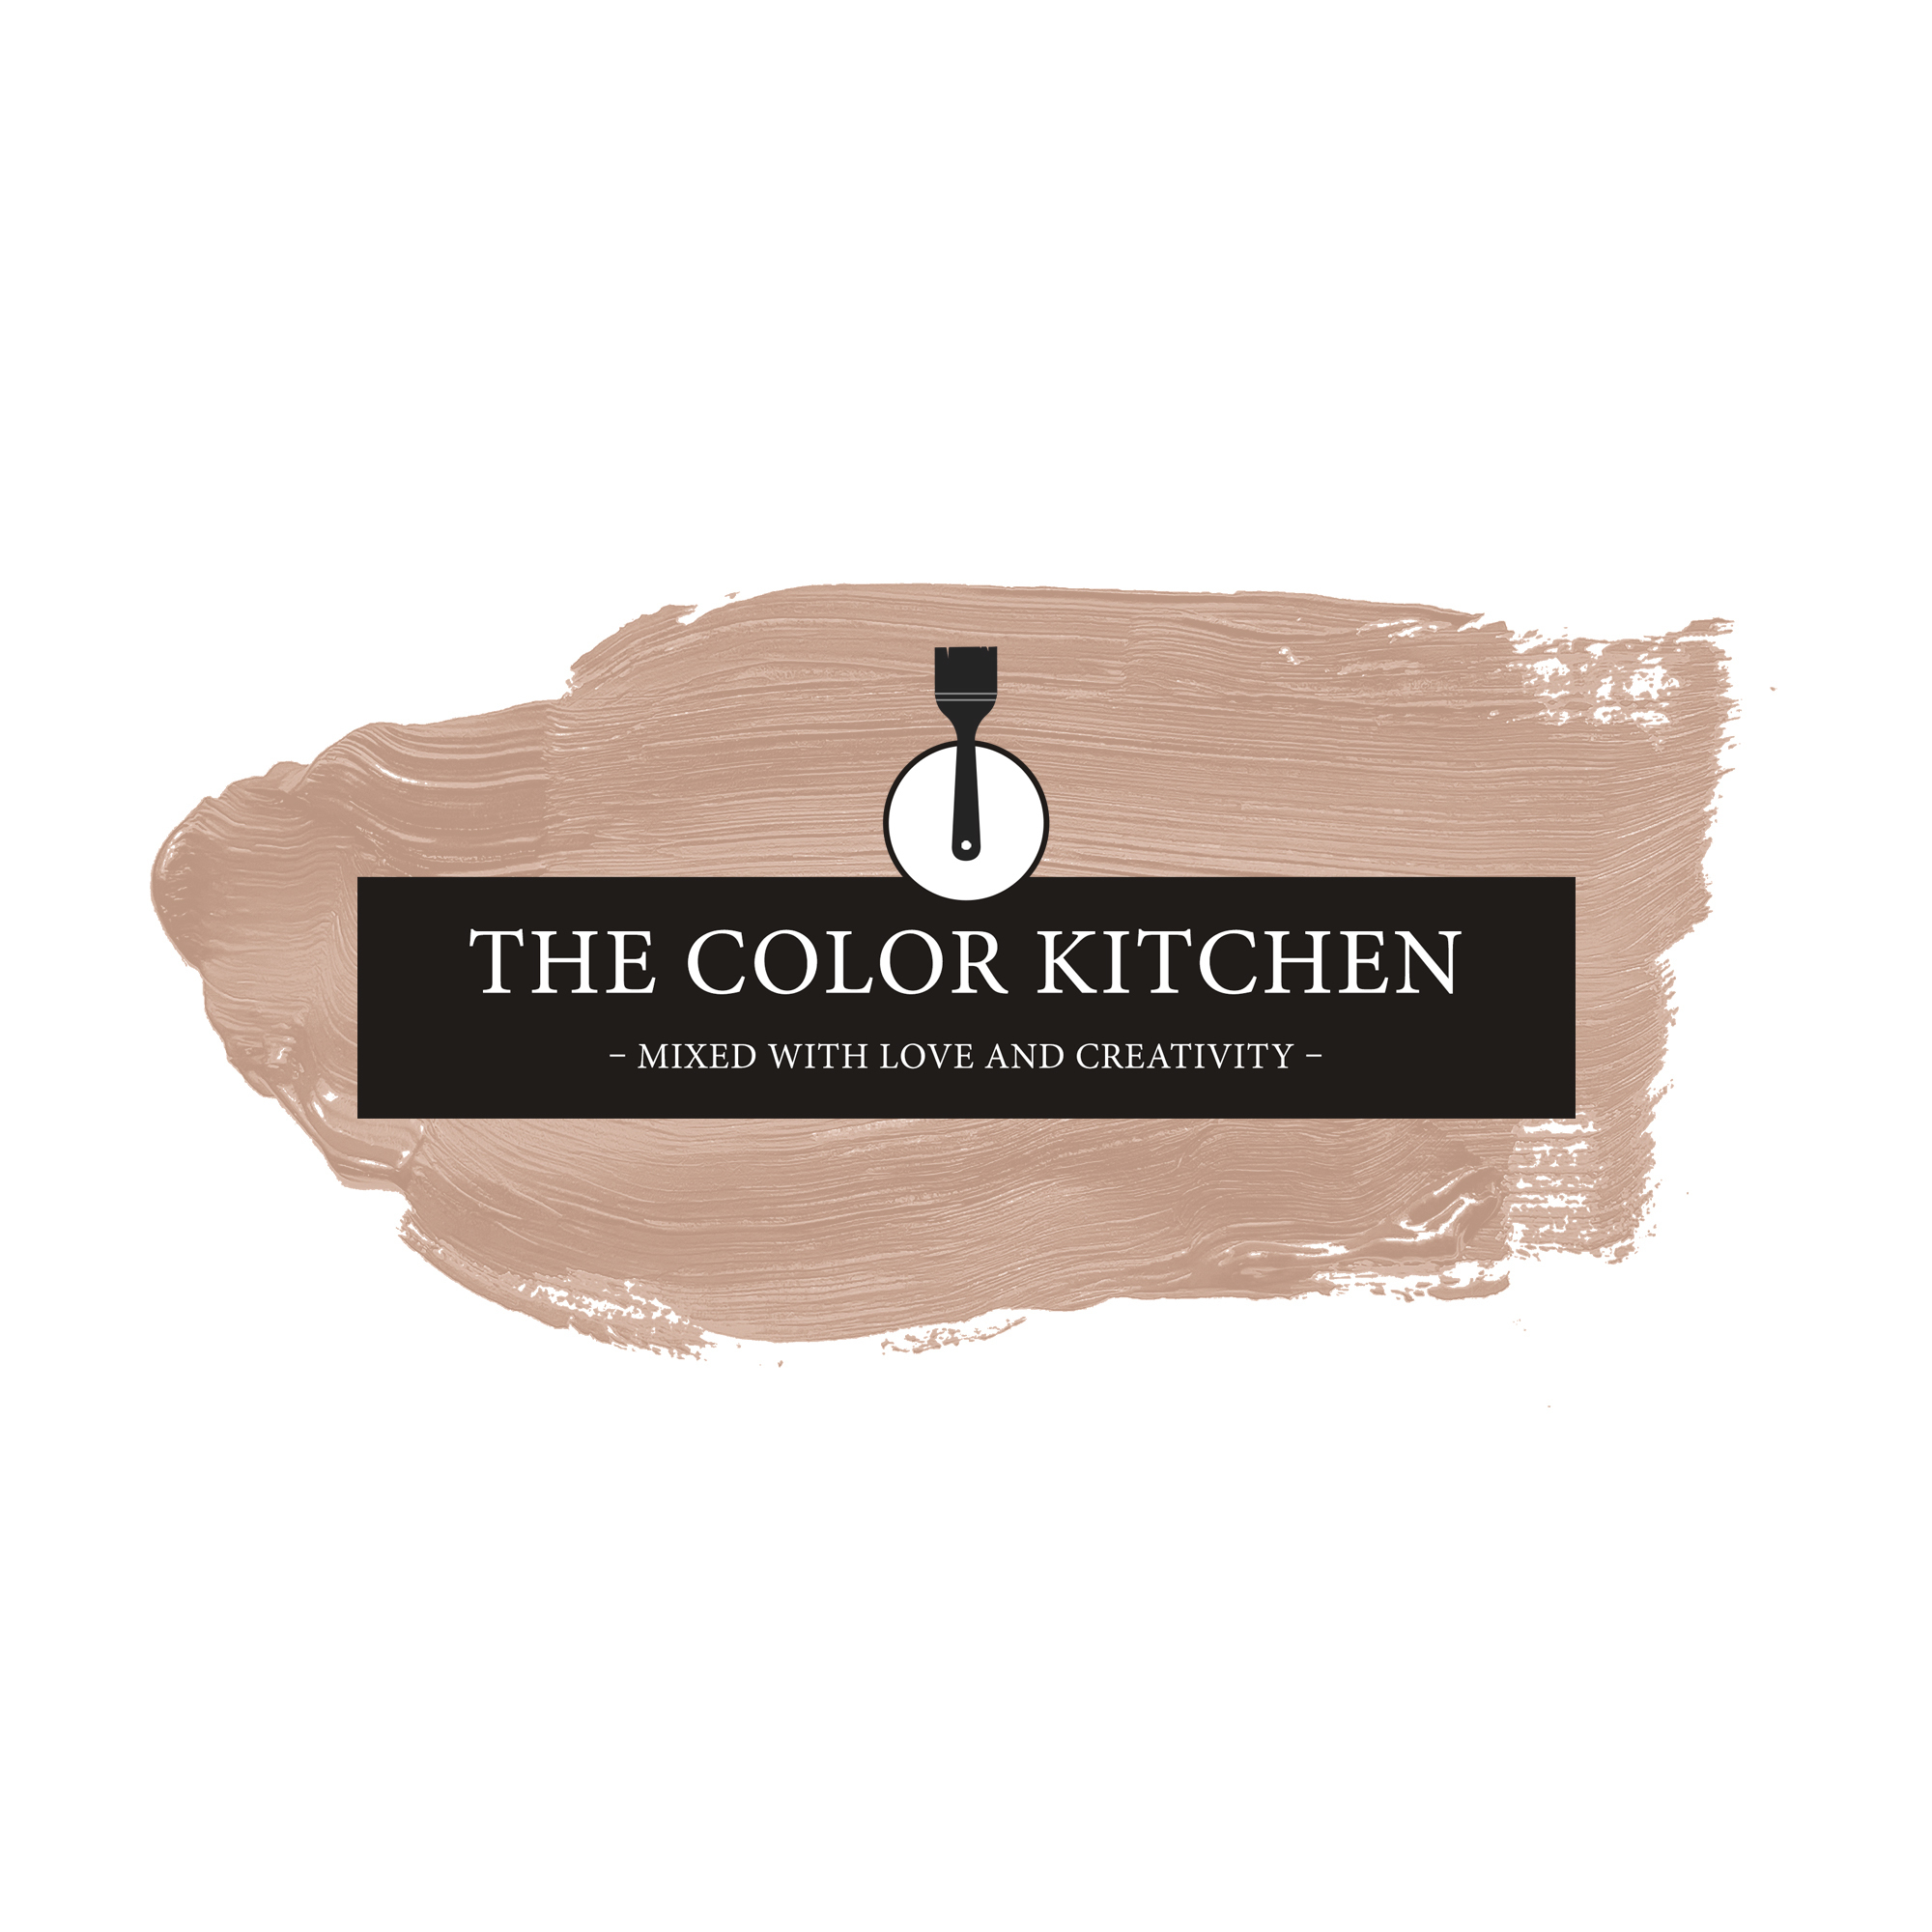 The Color Kitchen Icy Chocolate 5 l